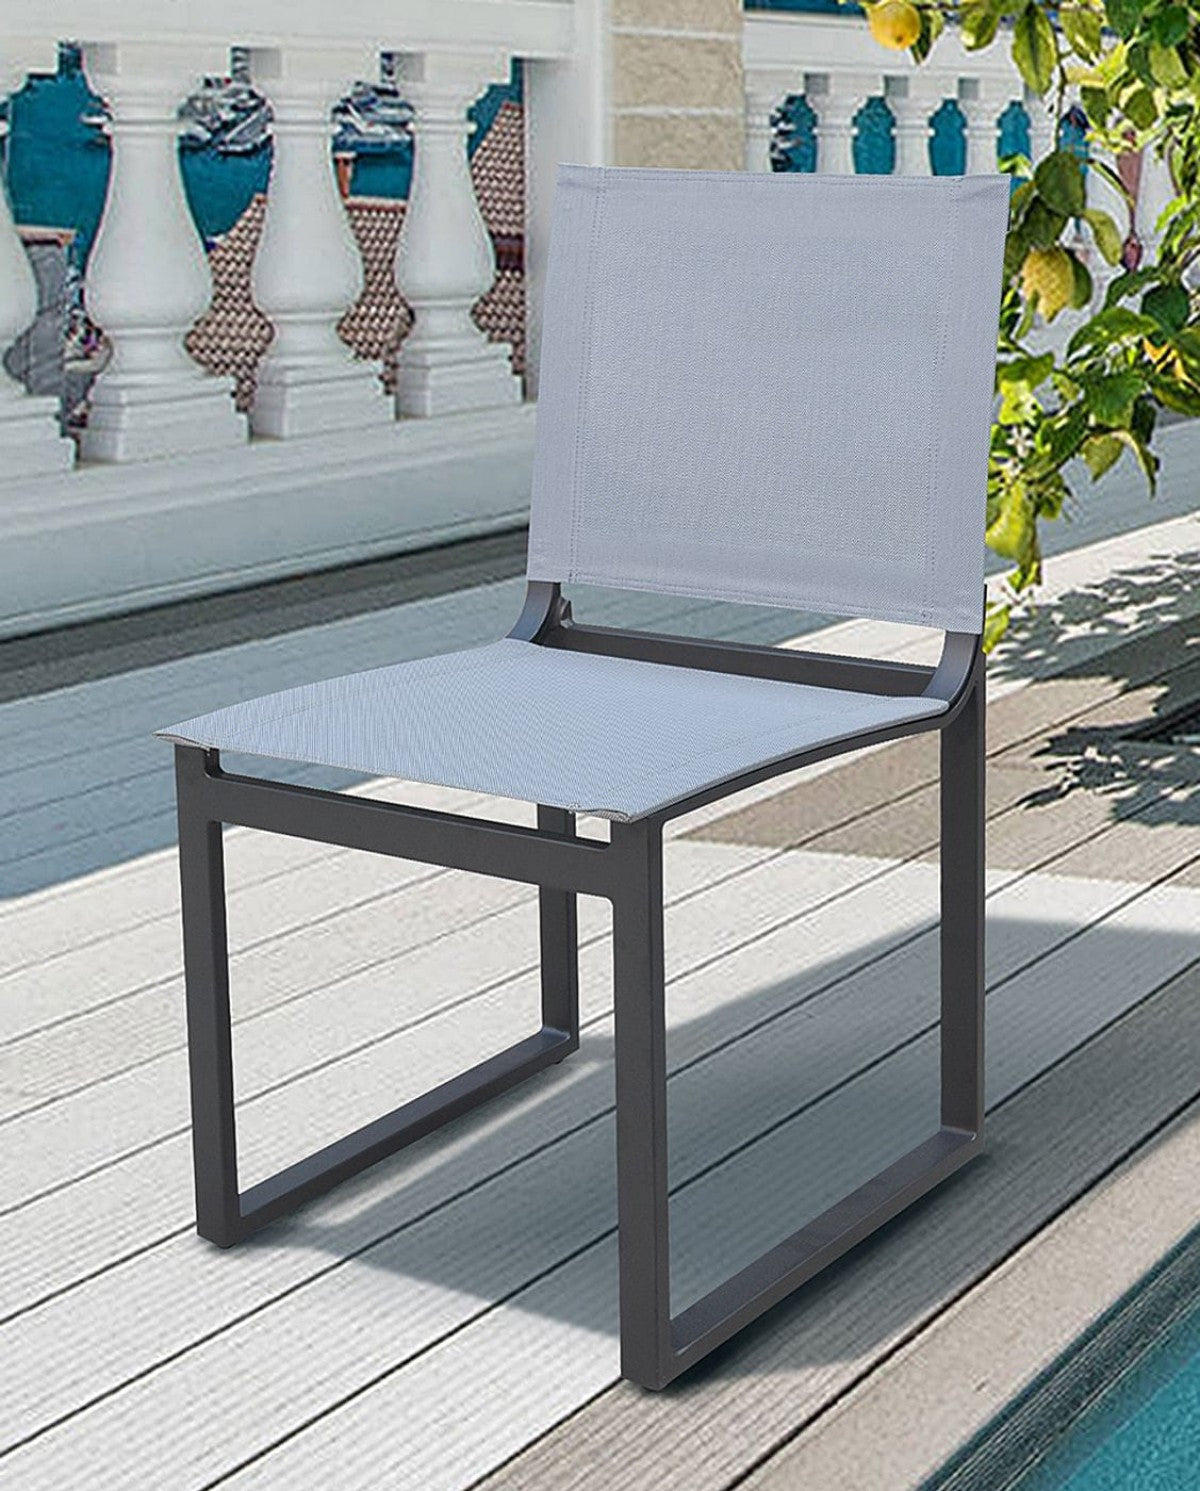 Set of Two 20" Gray and Black Metal Indoor Outdoor Dining Chair